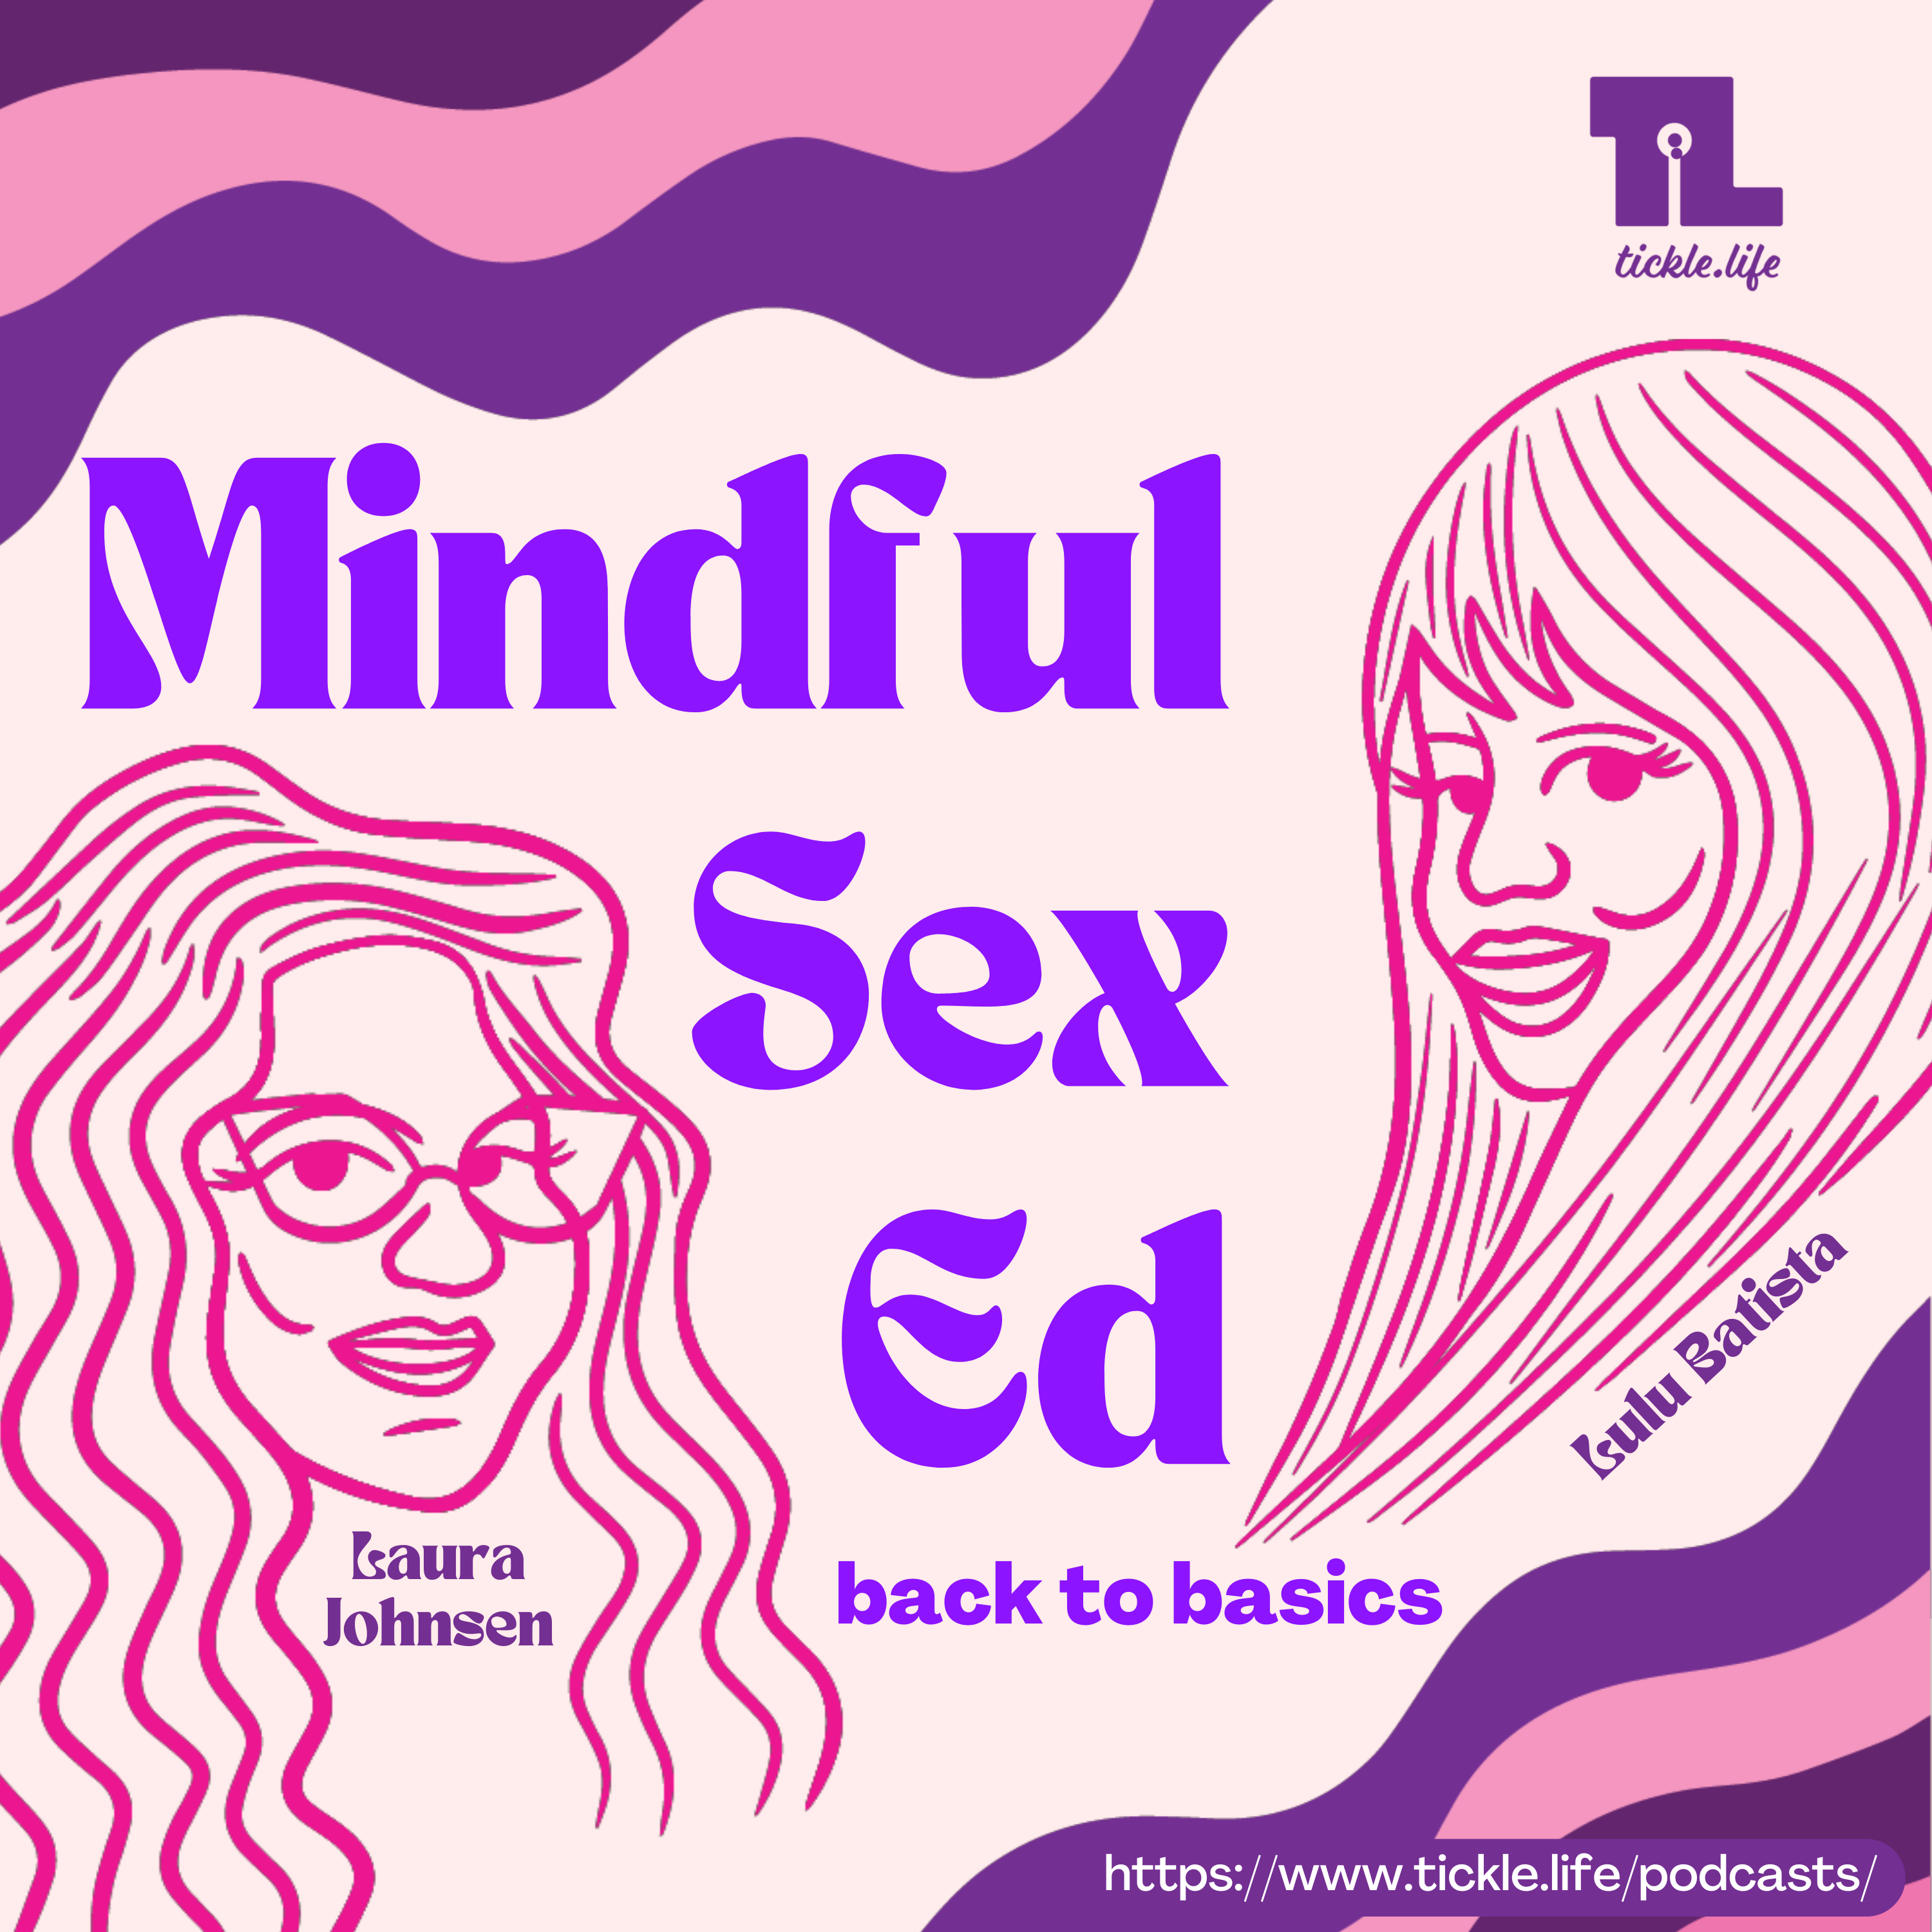 What Is 69 Nice Mindful Sex Ed Back To Basics Podcast Podtail